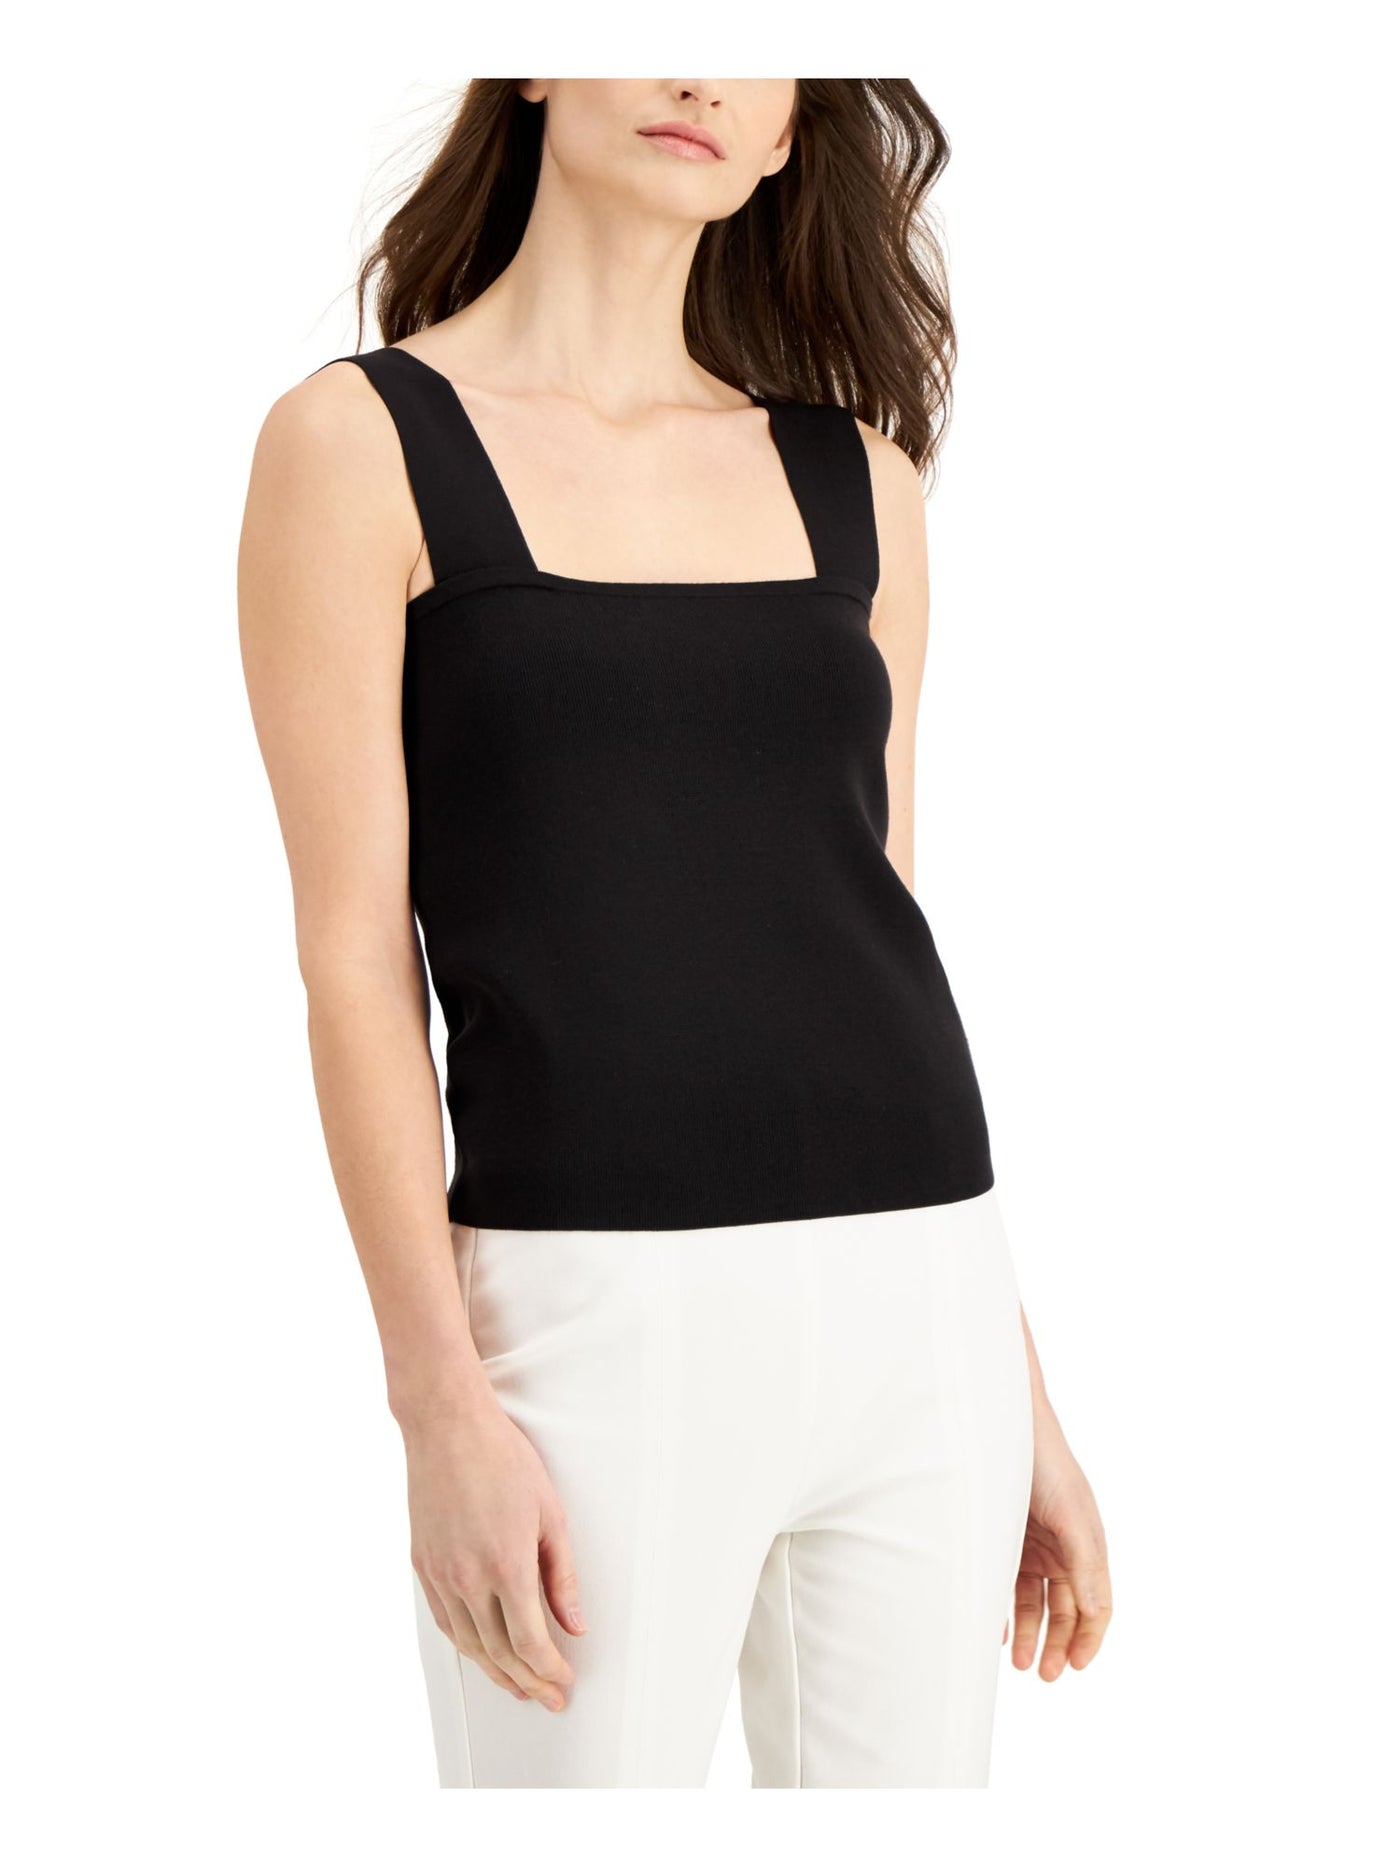 DONNA KARAN NEW YORK Womens Black Unlined Camisole Sleeveless Square Neck Crop Top S